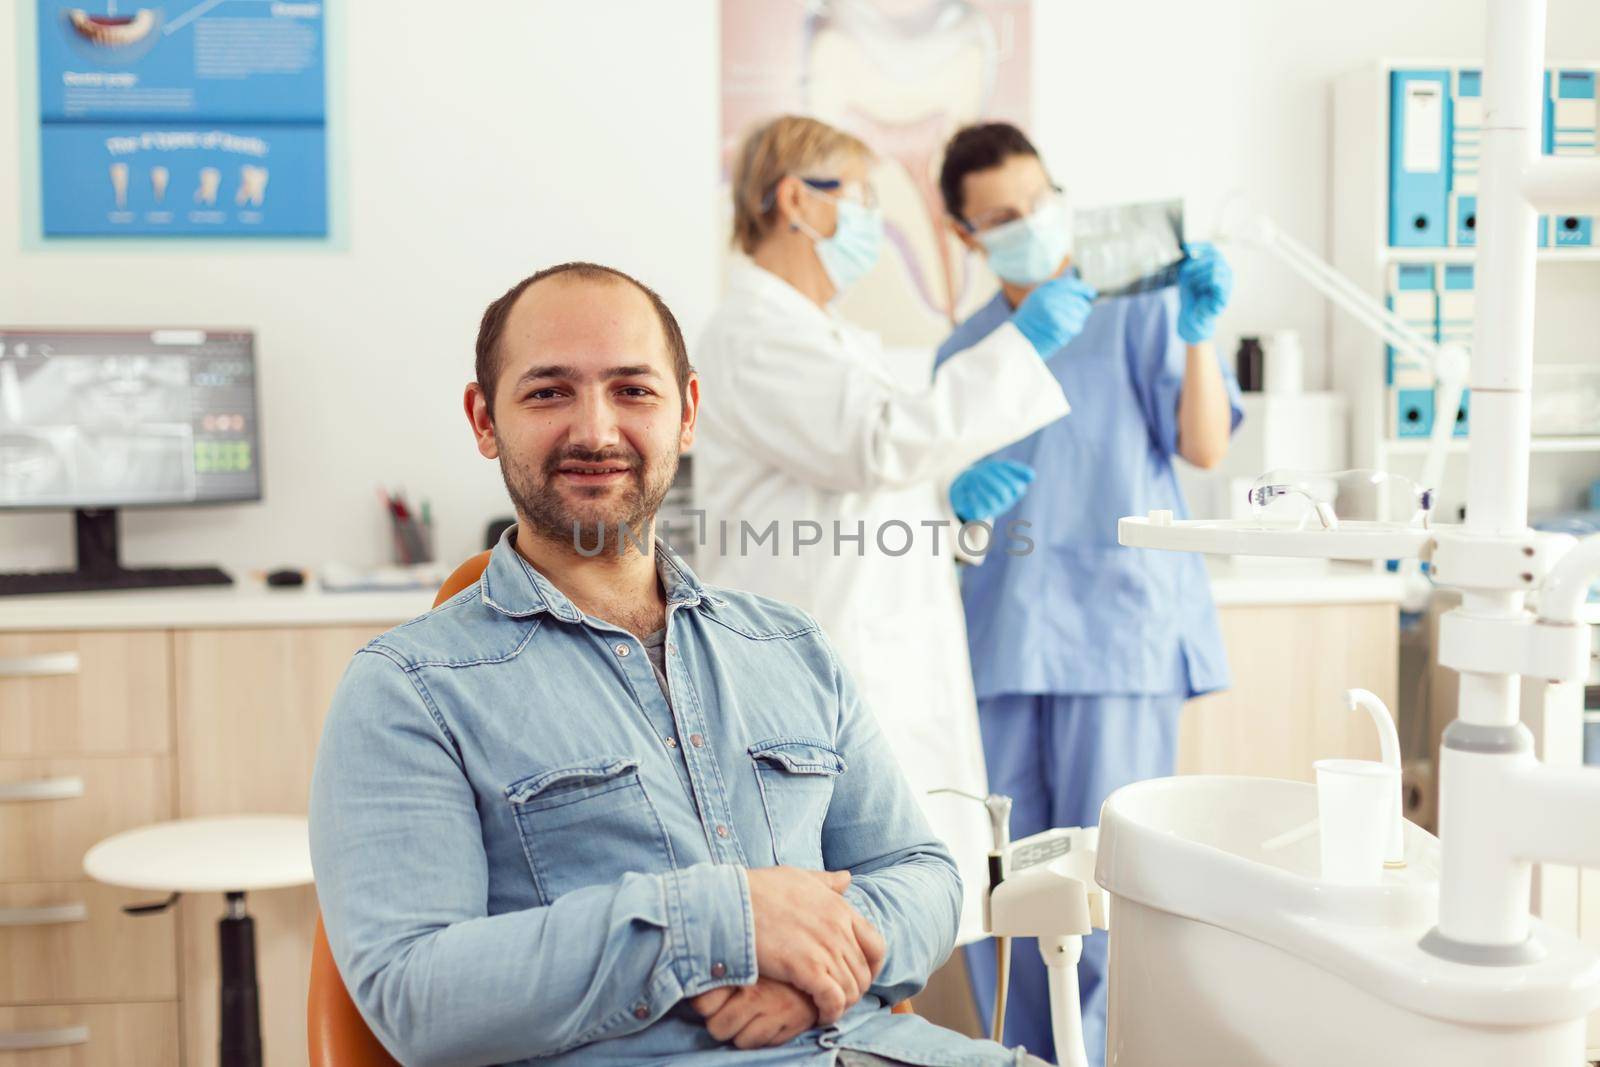 Portrait of man patient sitting on dental chair preparing for stomatology consultation waiting for somatology treatment. Senior woman doctor and medical nurse examining orthodontic x-ray